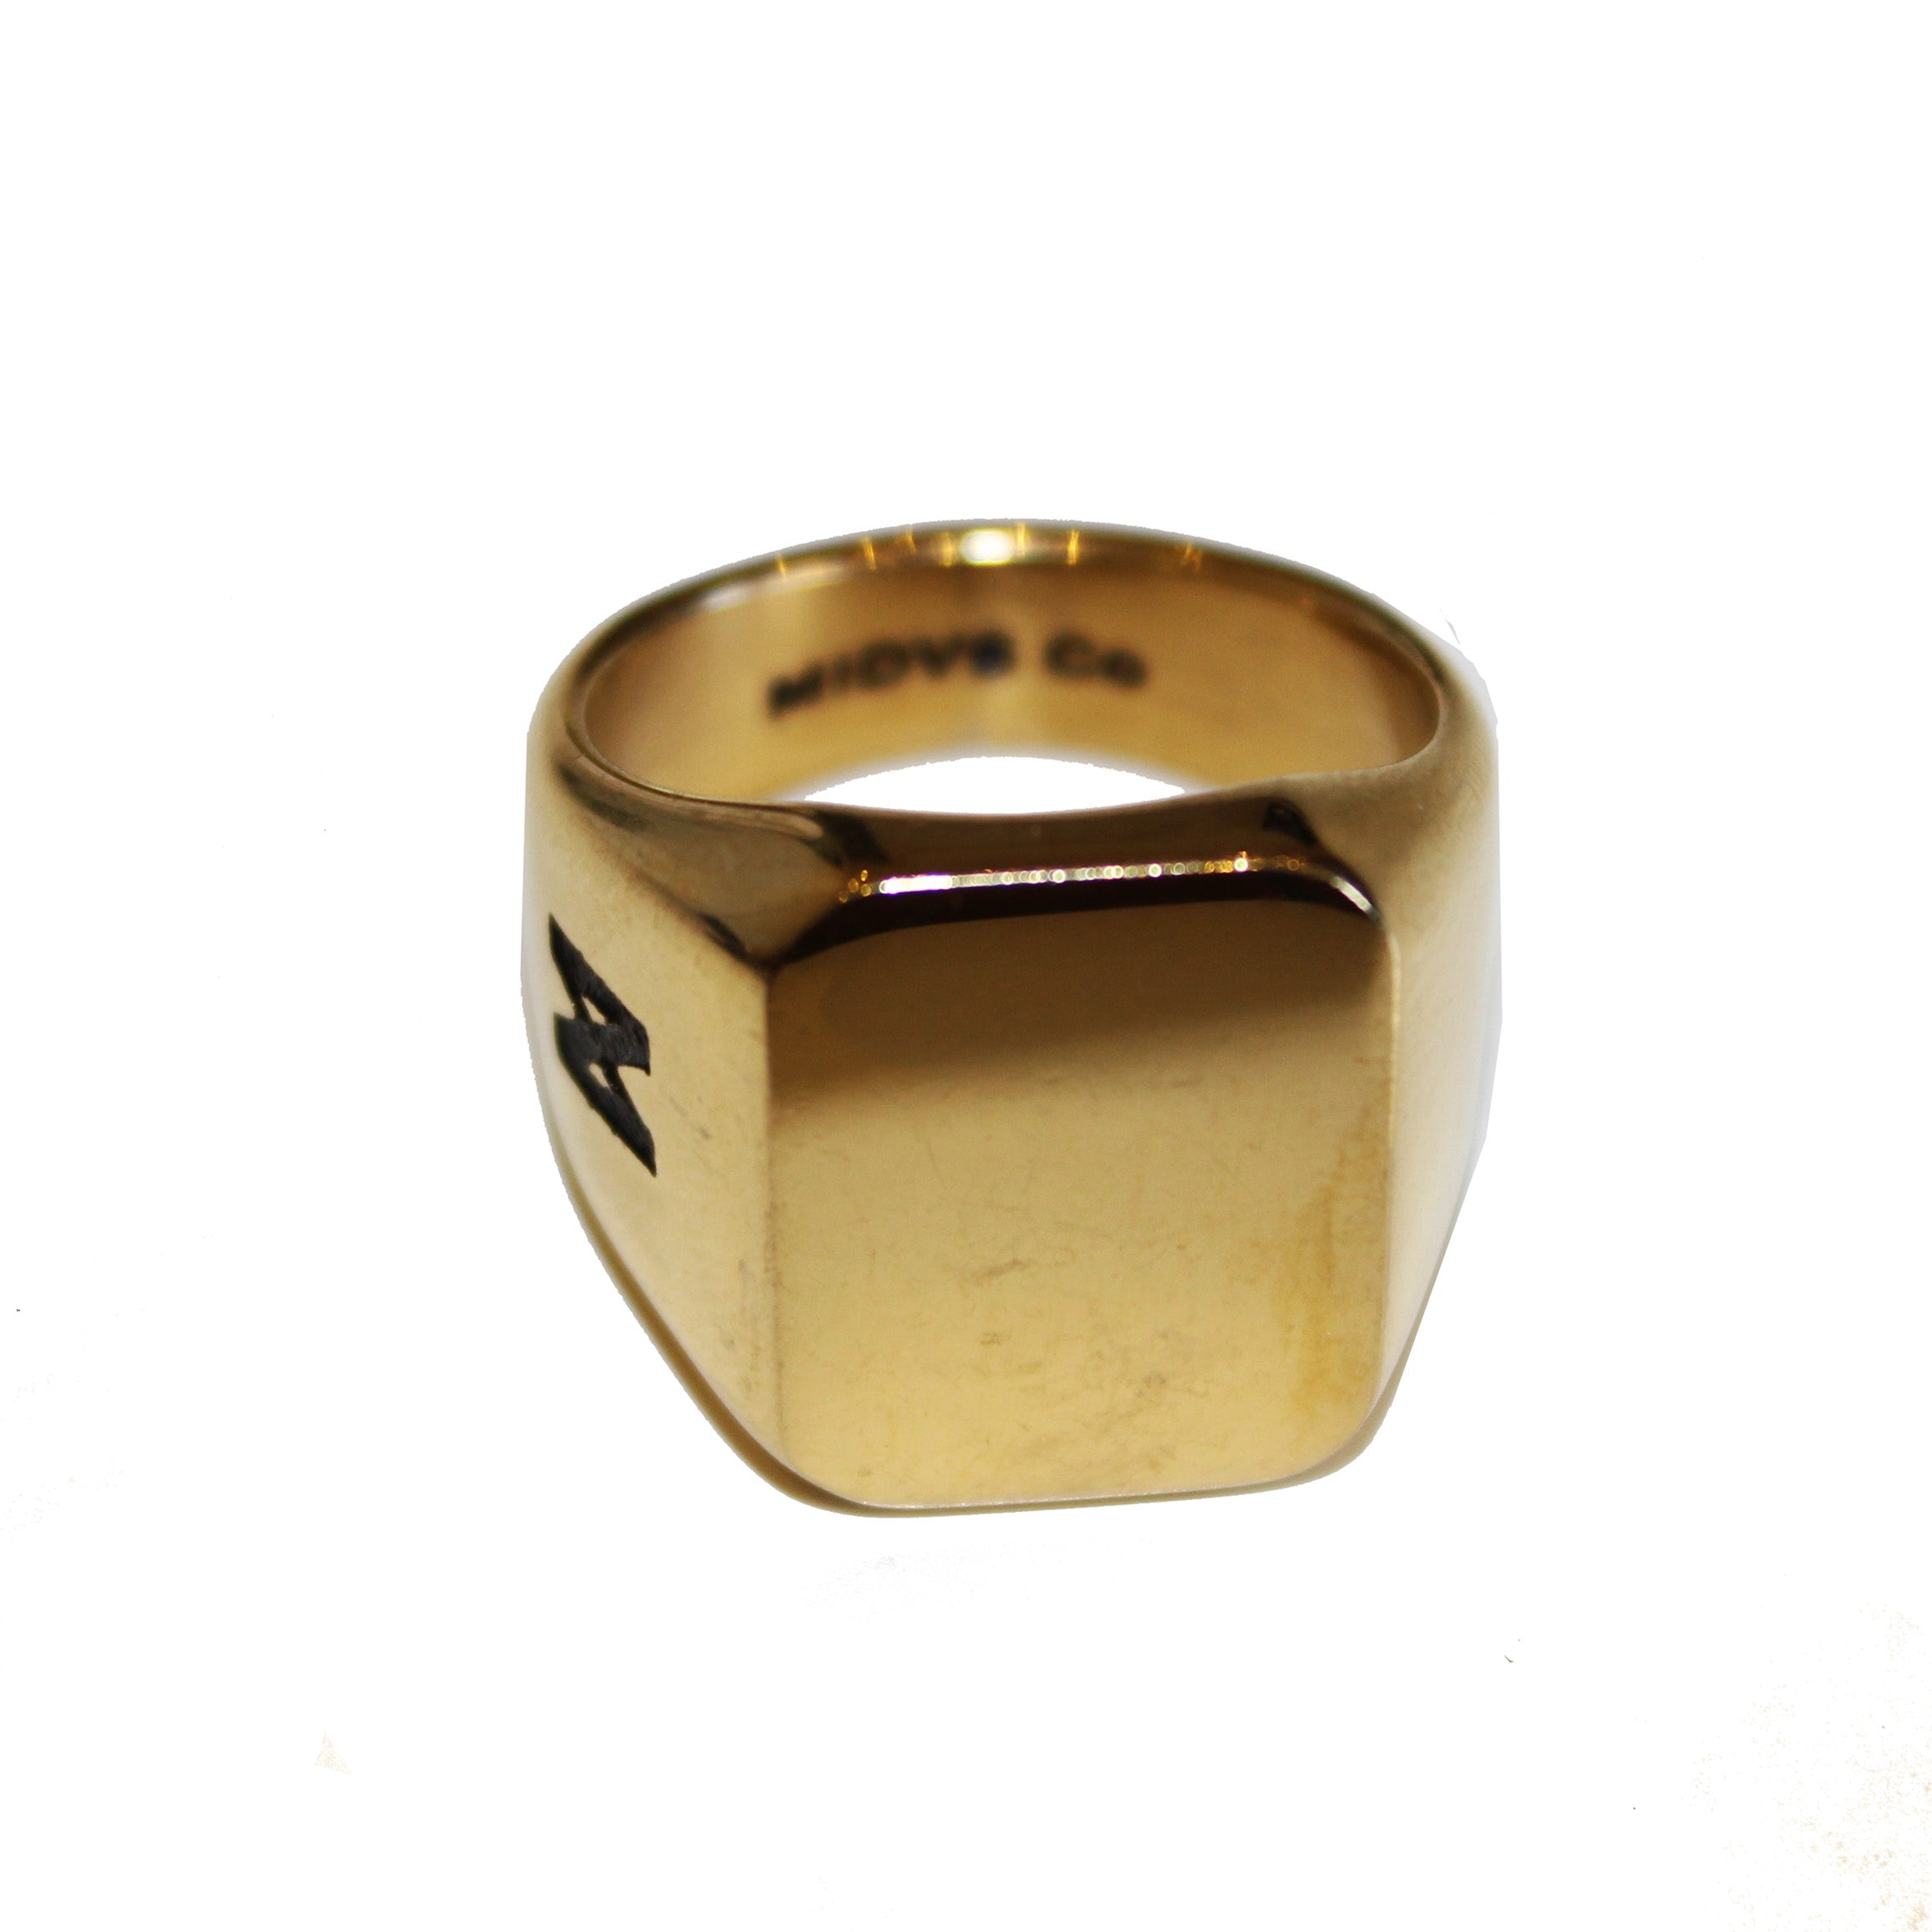 The Kilo Ring - 18kt Gold